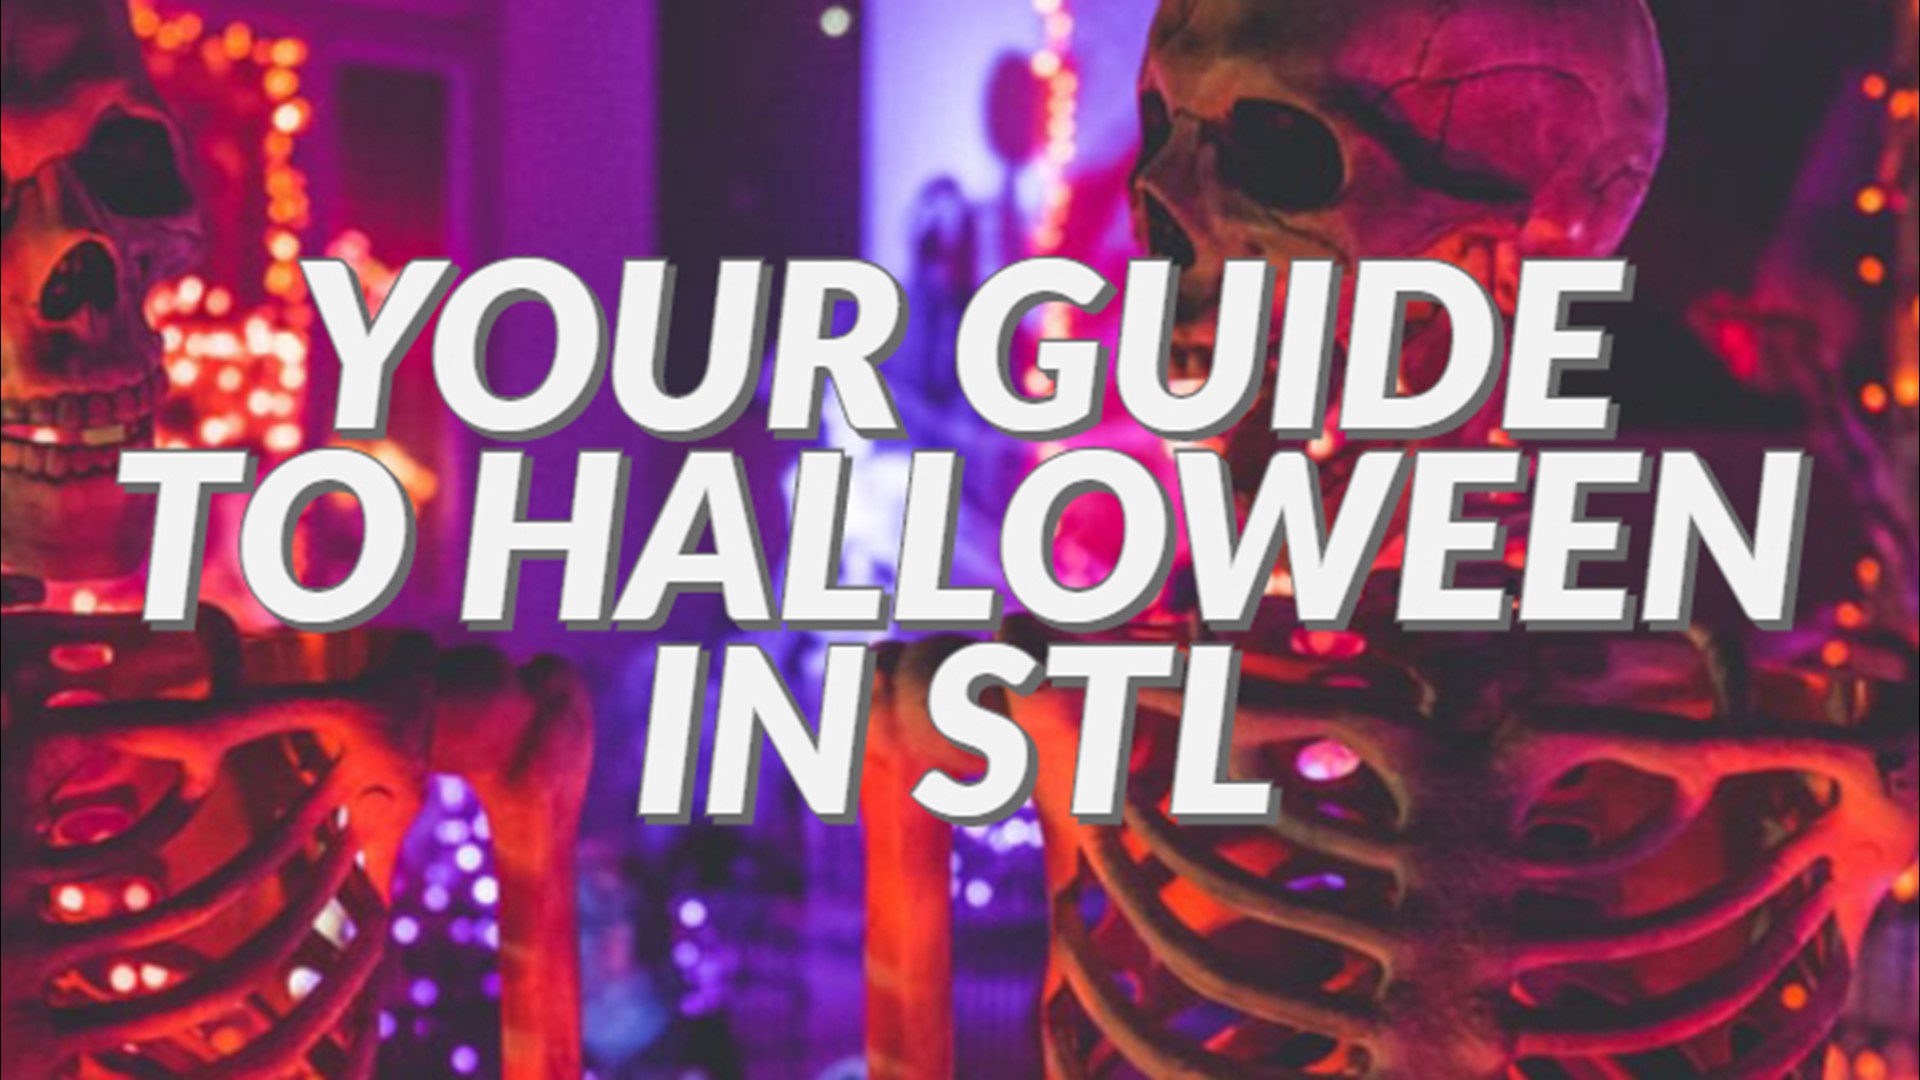 Things to do on Halloween in St. Louis